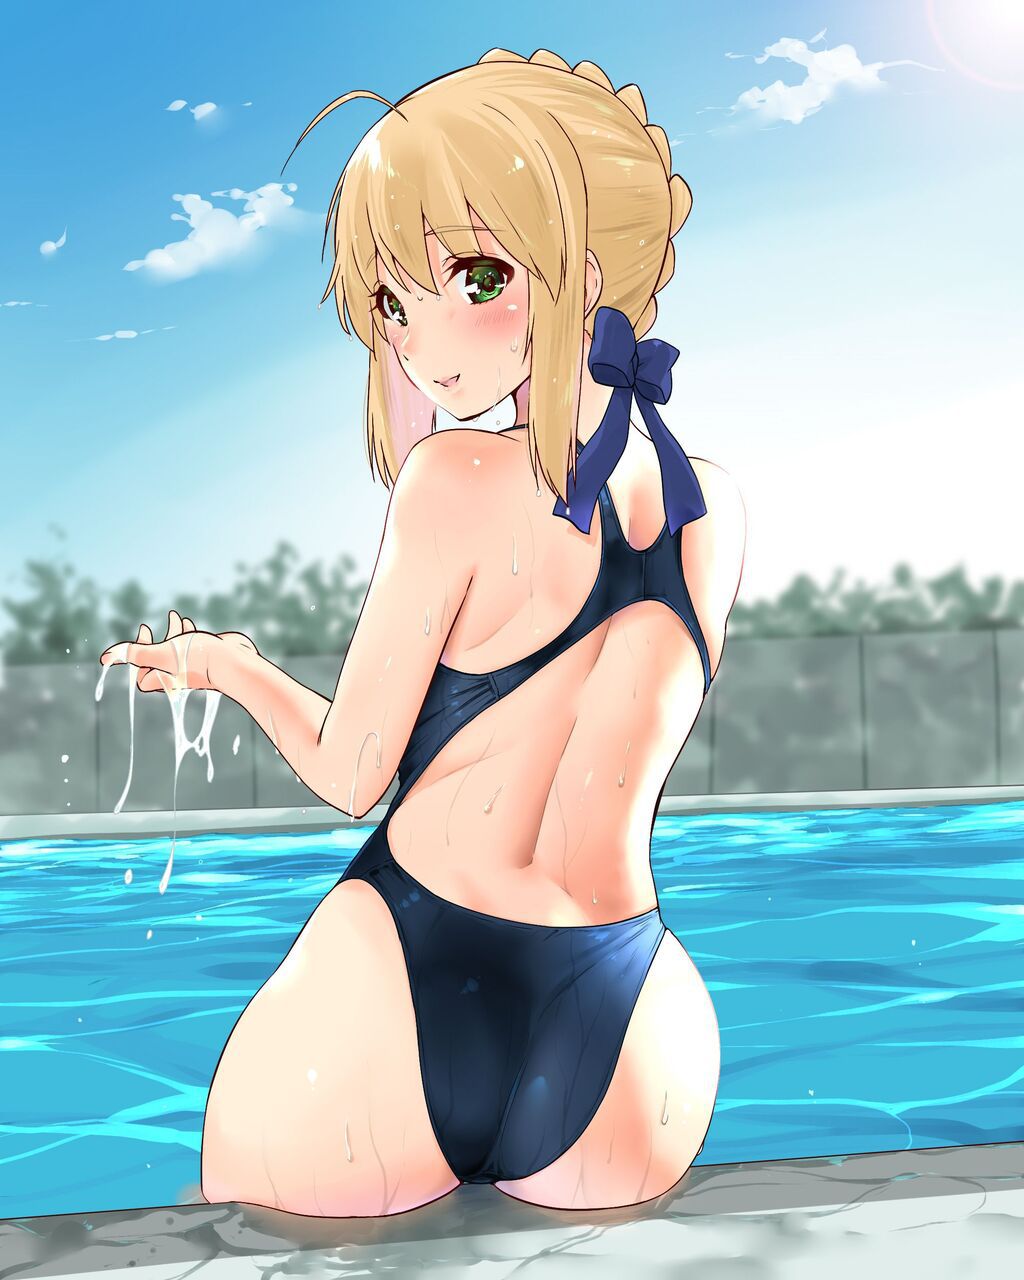 I'm going to put up an erotic cute image of a swimsuit! 13